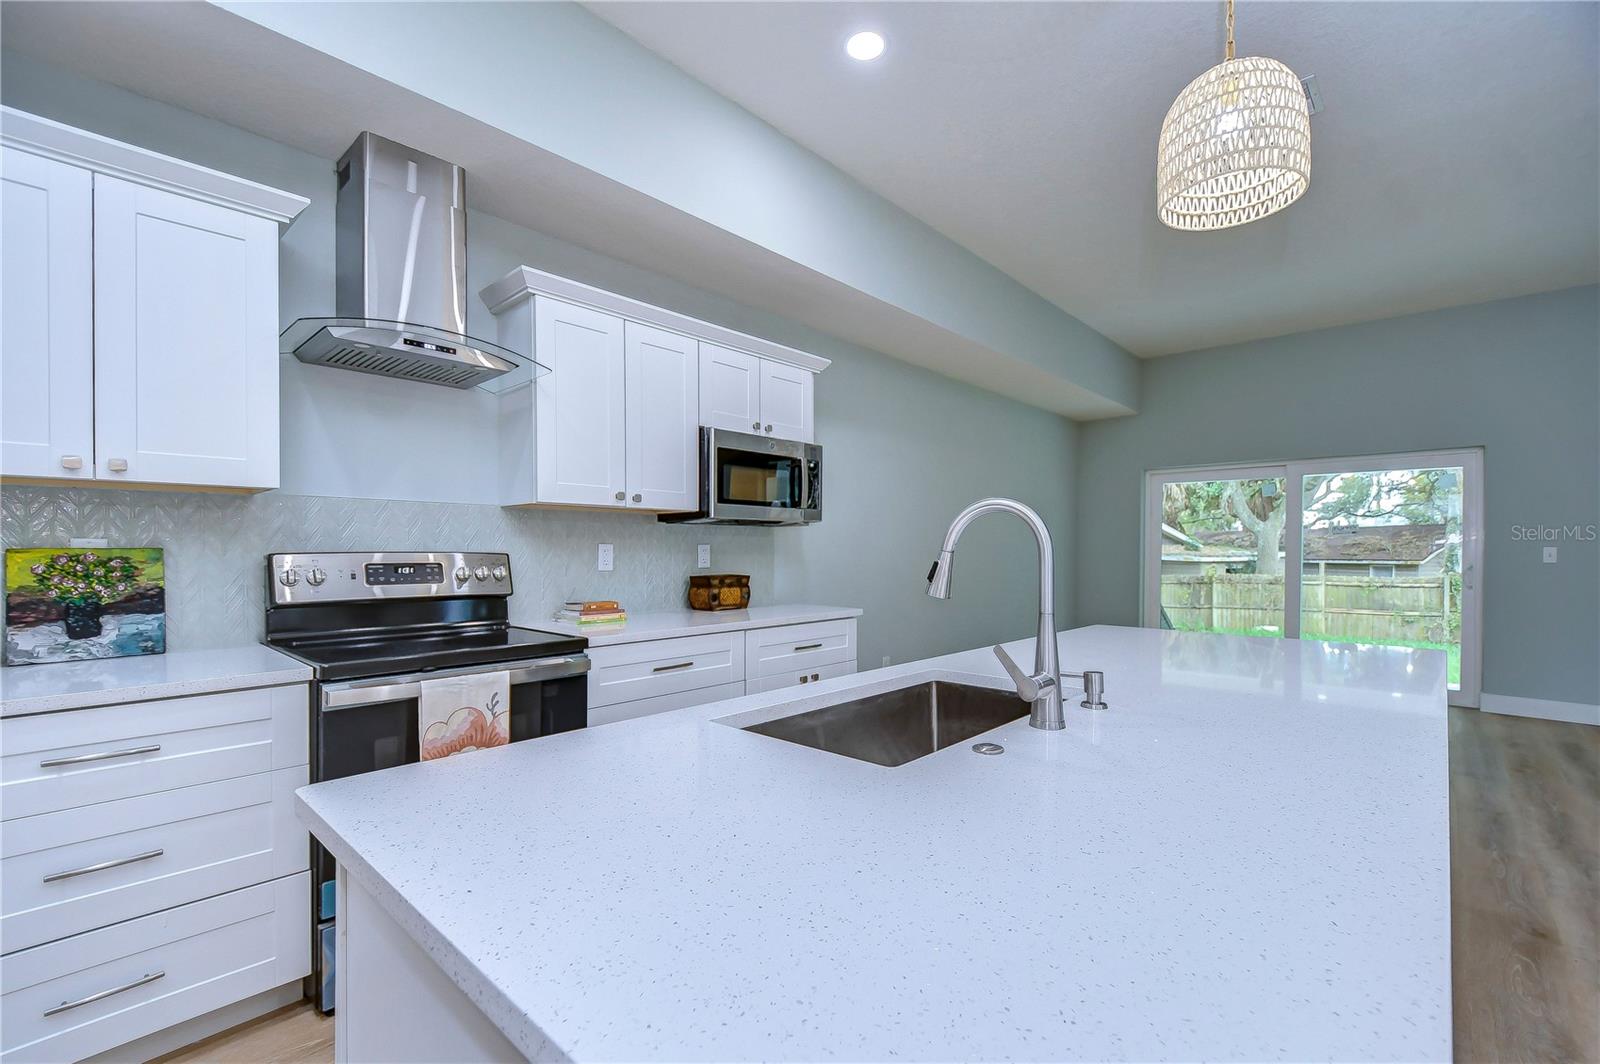 The Chef of the Home is sure to Love this Beautiful Kitchen with Quartz Countertops!!!